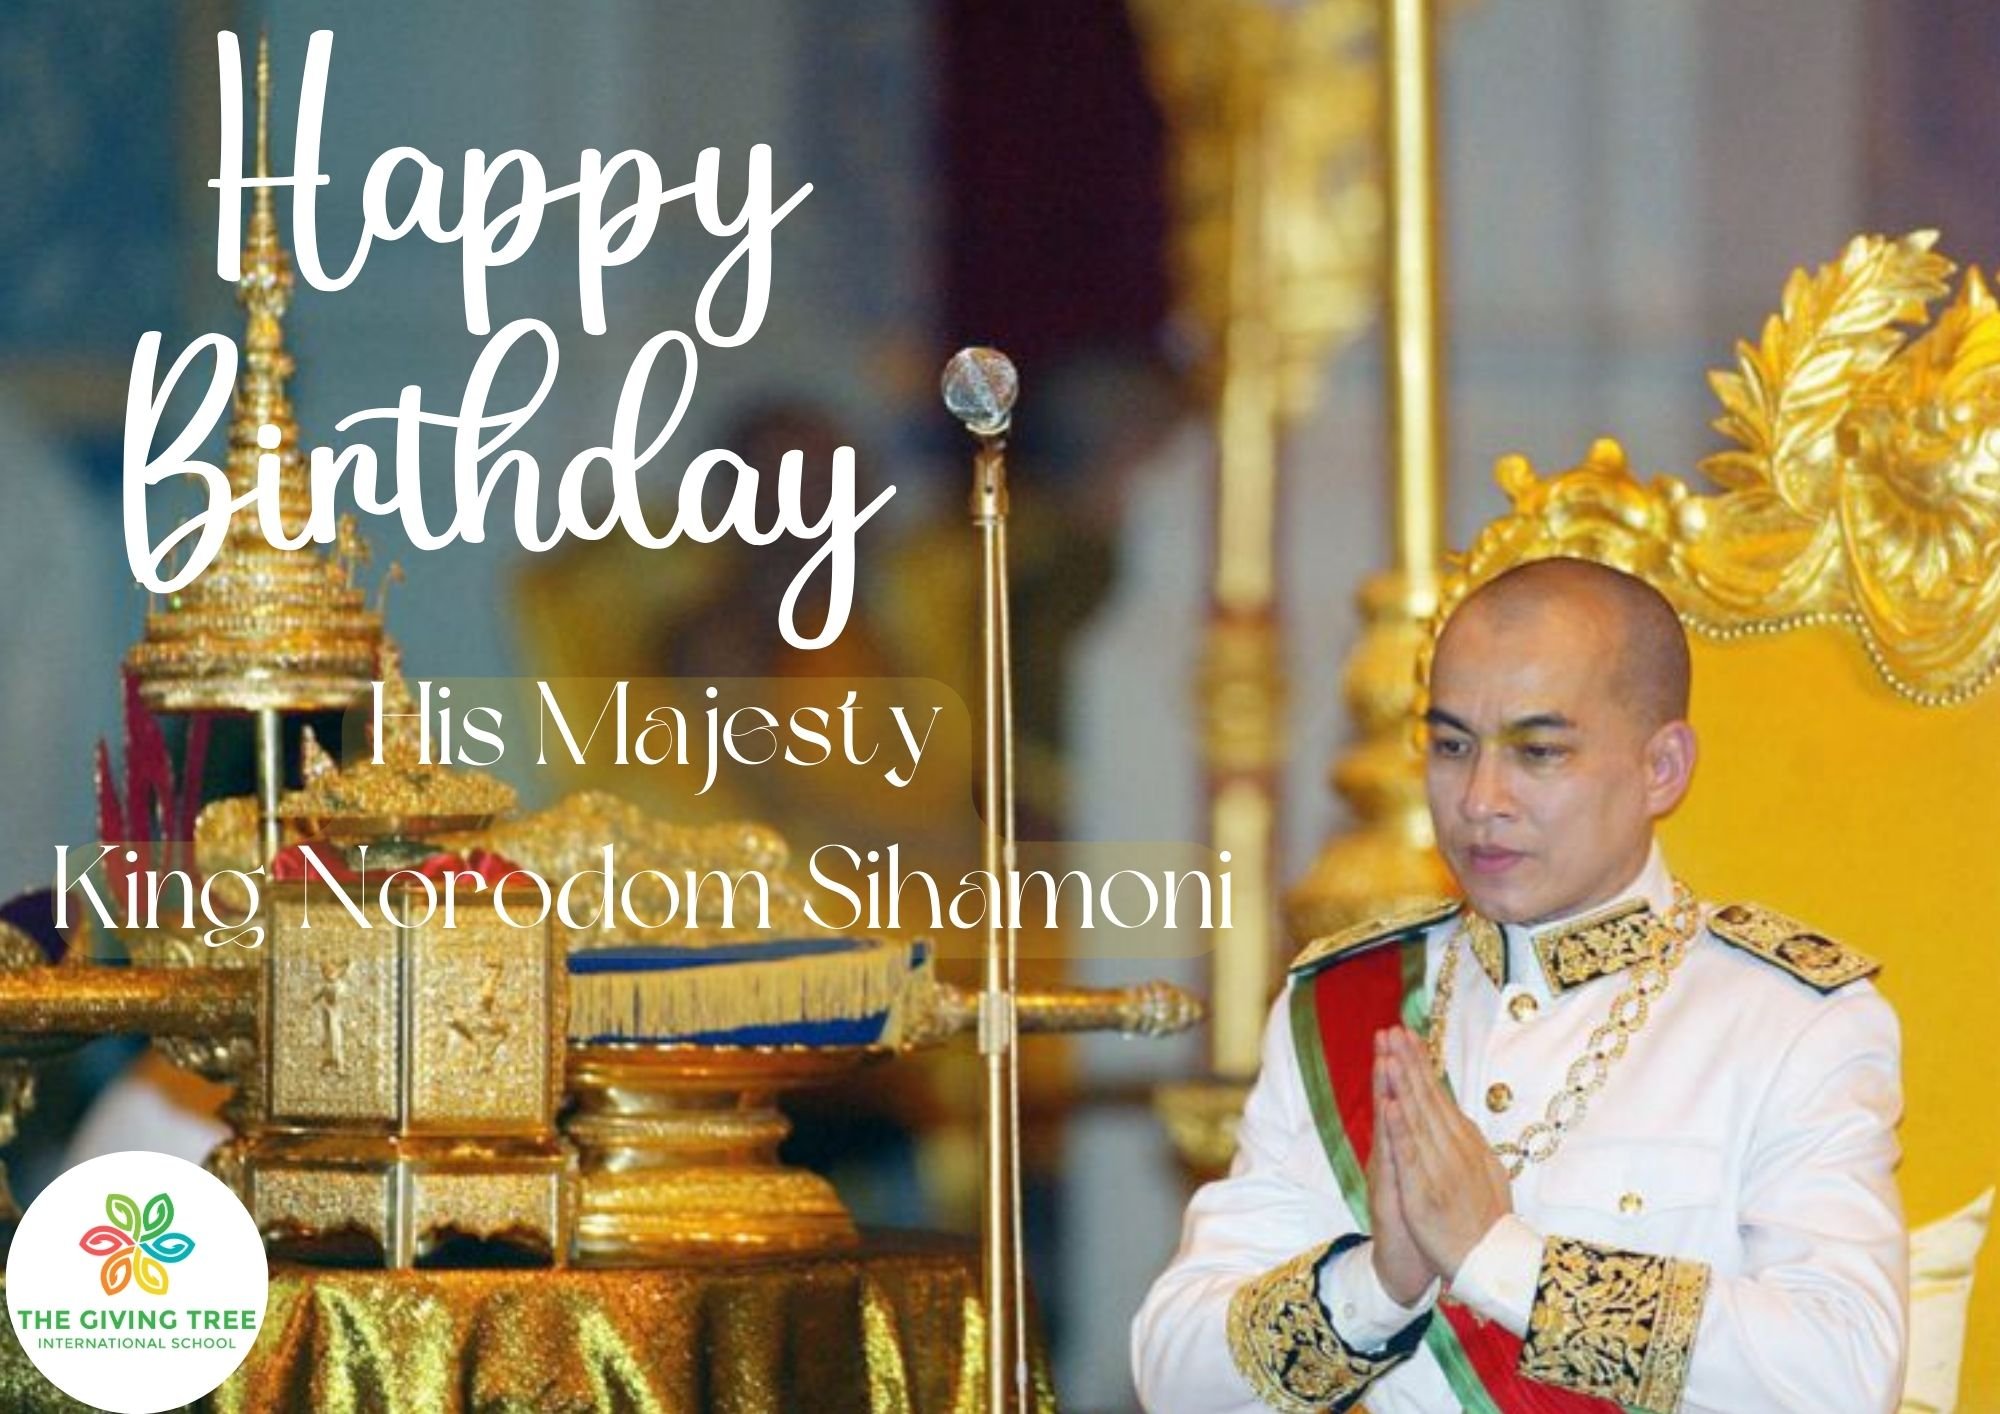 🎉✨Happy Birthday to King Sihamoni! 🎂👑 The Giving Tree International School extends warm wishes to Cambodia's beloved monarch on this special day. As we celebrate, let's also remember: classes resume tomorrow, Wednesday, May 15th. 

See you all bac